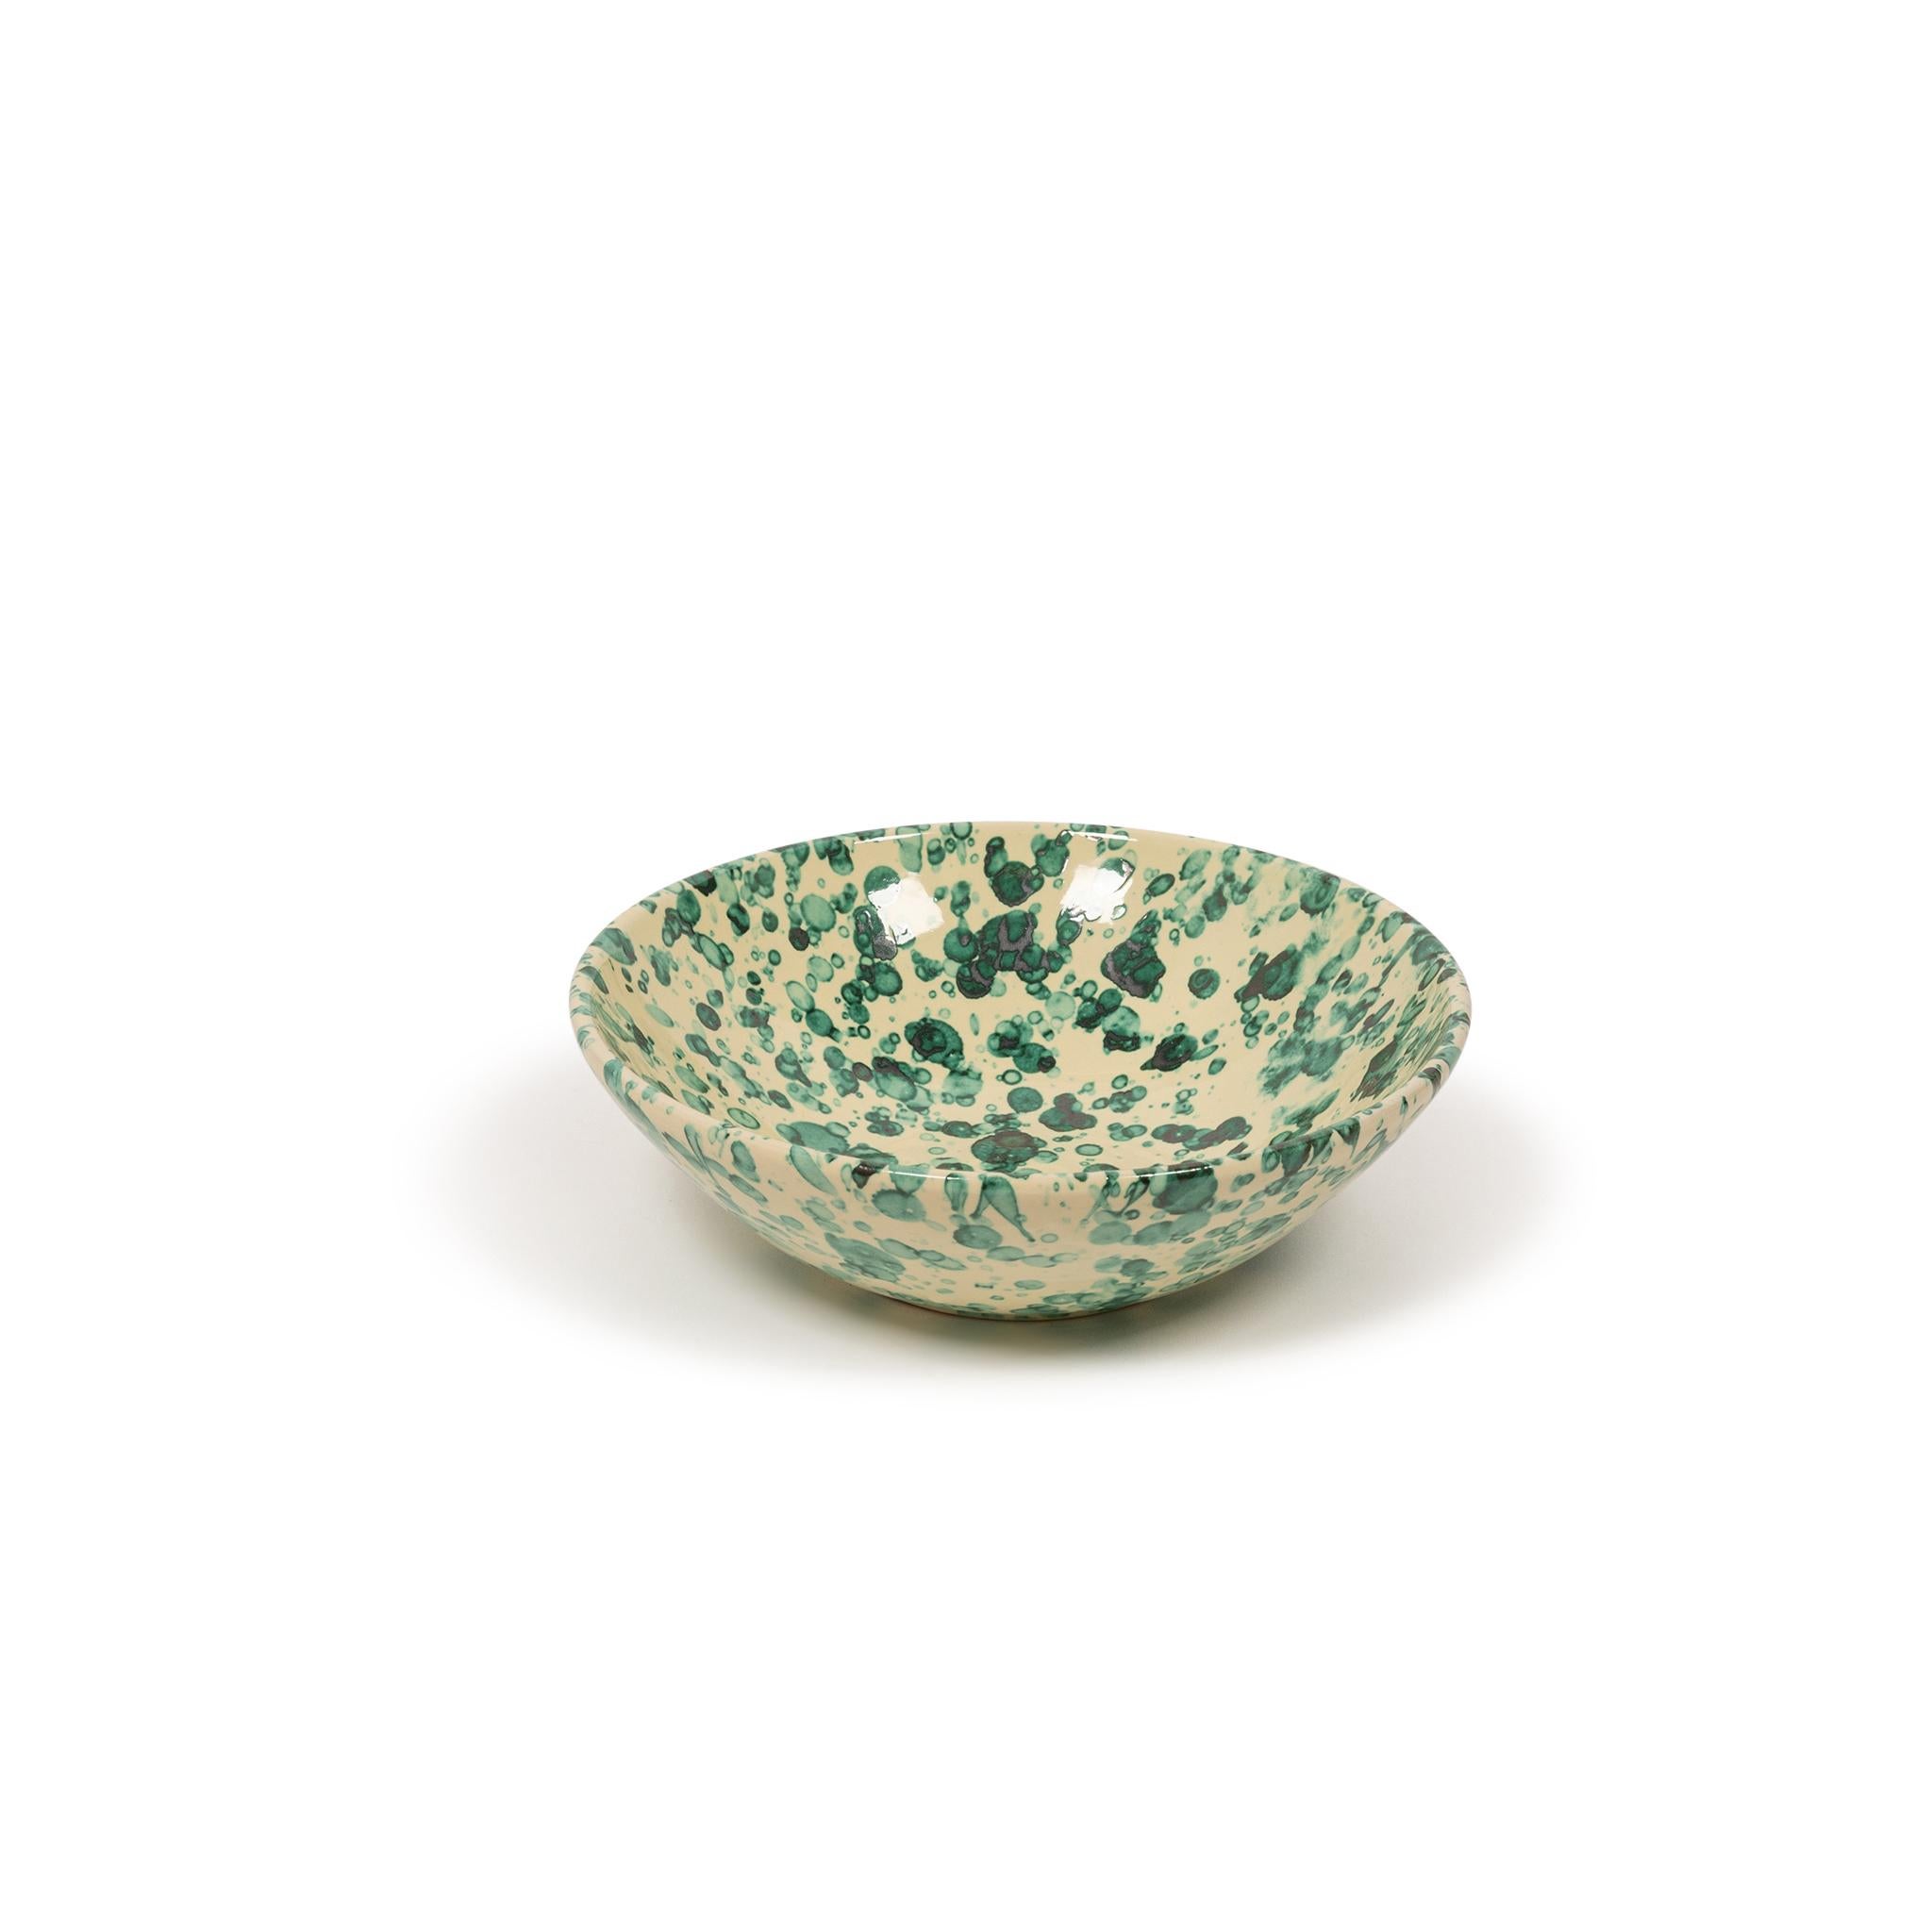 If you’re only buying one piece for the table, it’s got to be one of these. Perfect for salads or pasta, our large splatter bowl looks lovely next to different collections of ceramics on the table. Choose from pink & blue, tan & ivory, and antique